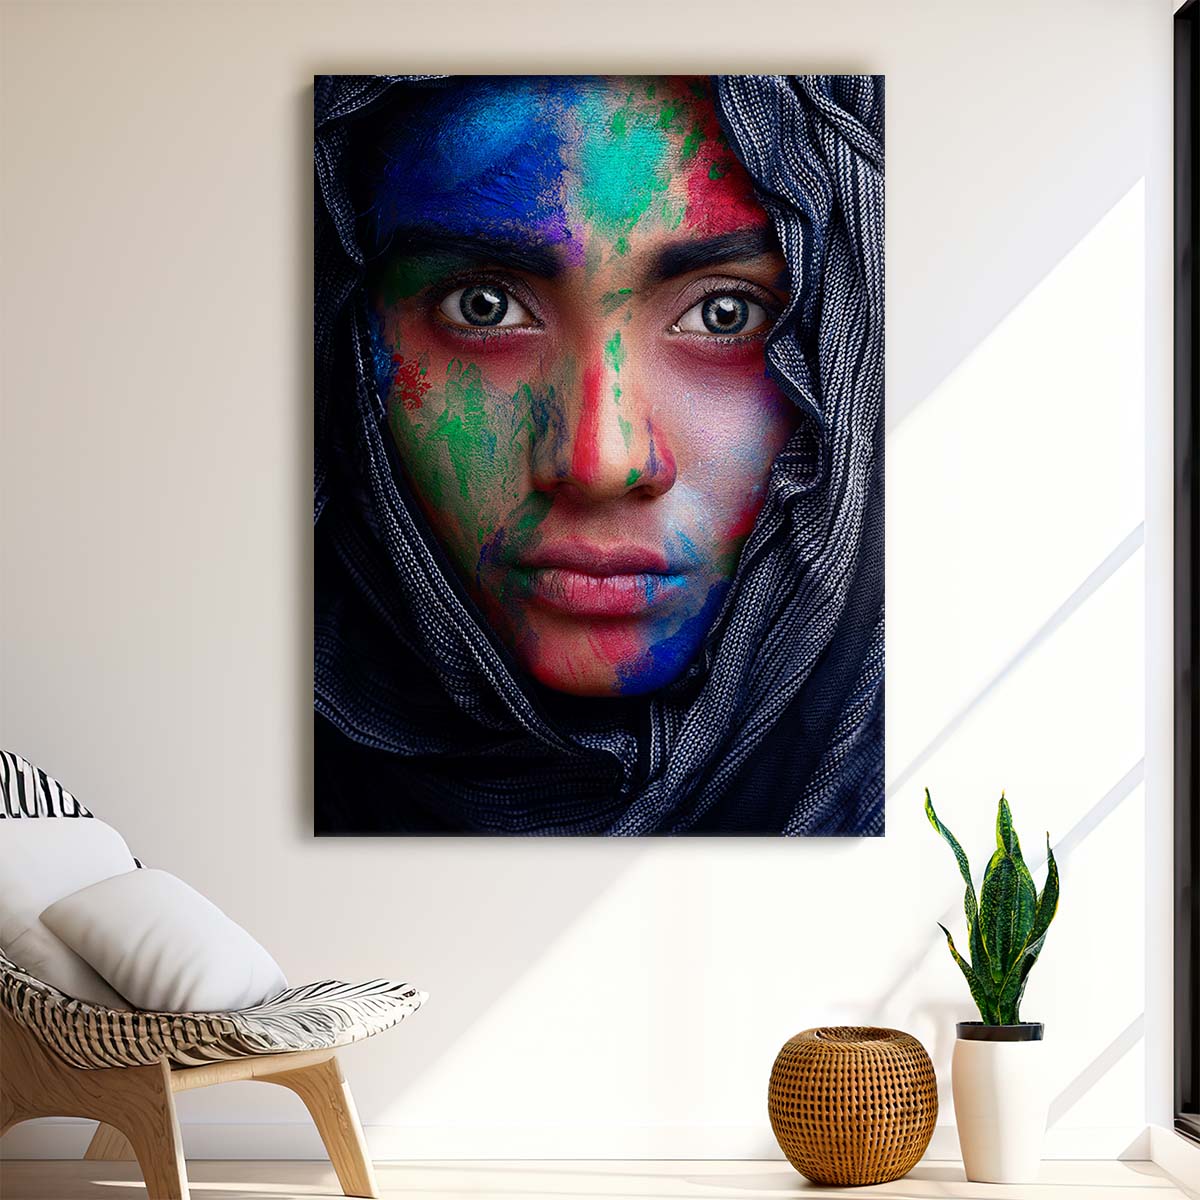 Colorful Painted Woman Portrait Intense Face & Veiled Expression Photography by Luxuriance Designs, made in USA